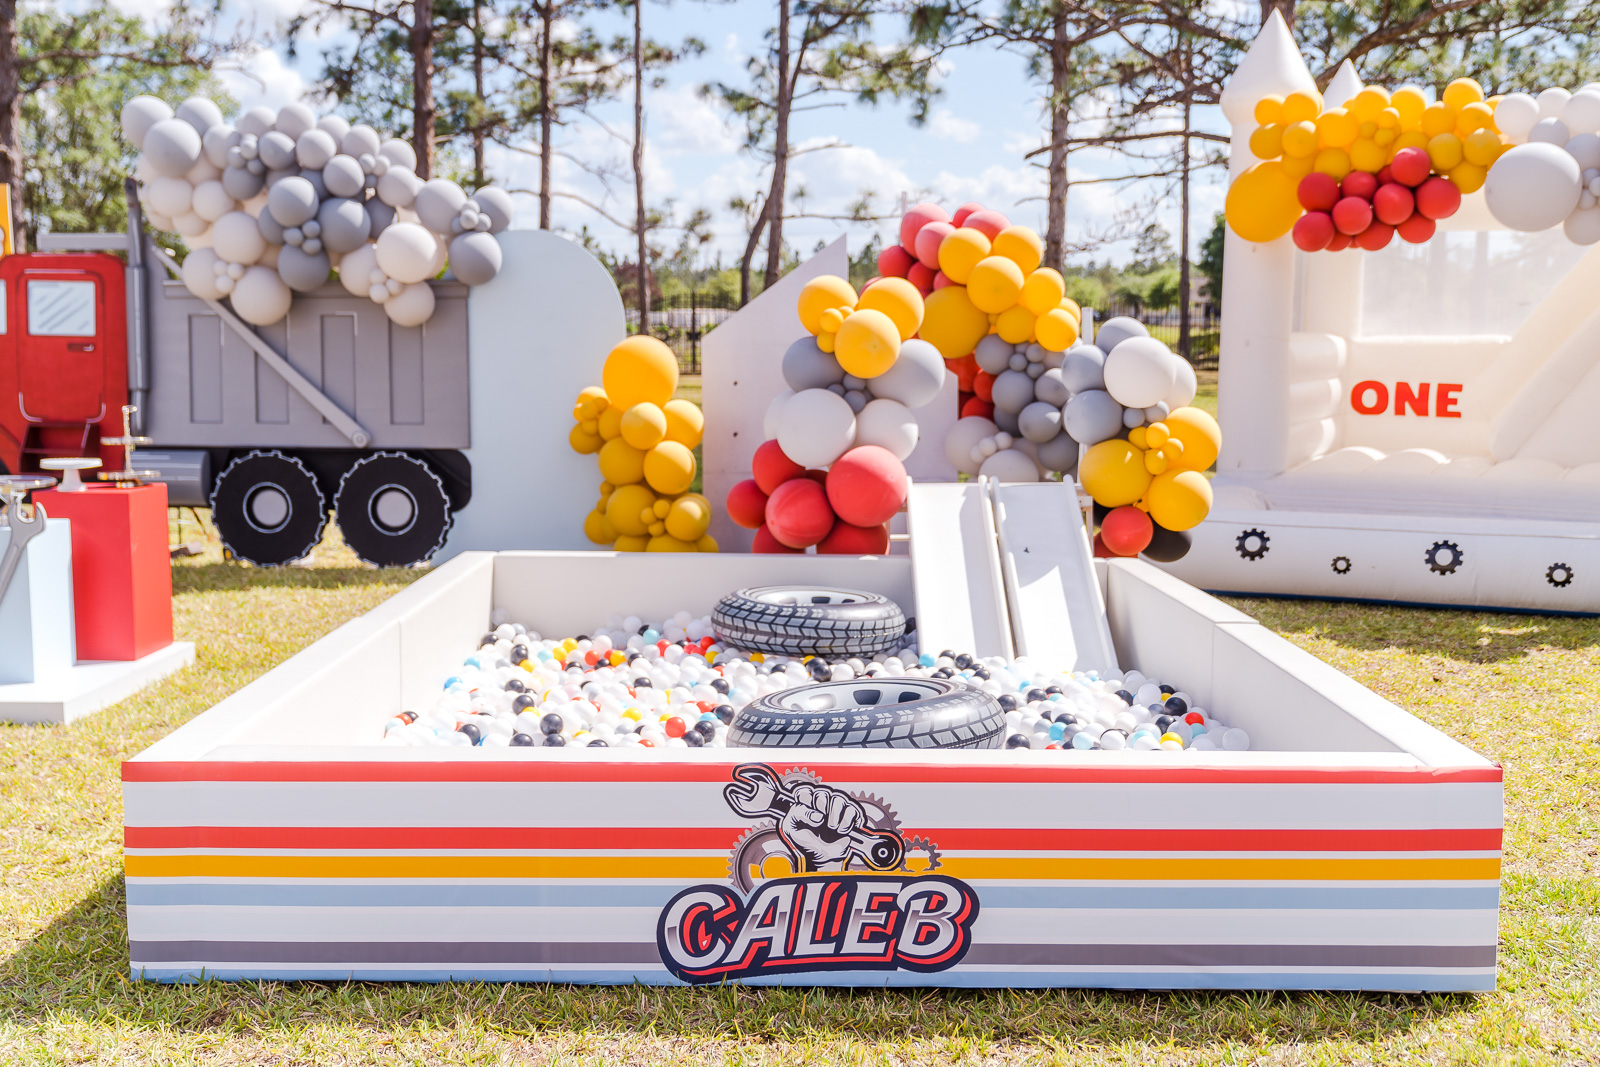 Customized ball bit for birthday party event in Orlando captured by top photographer